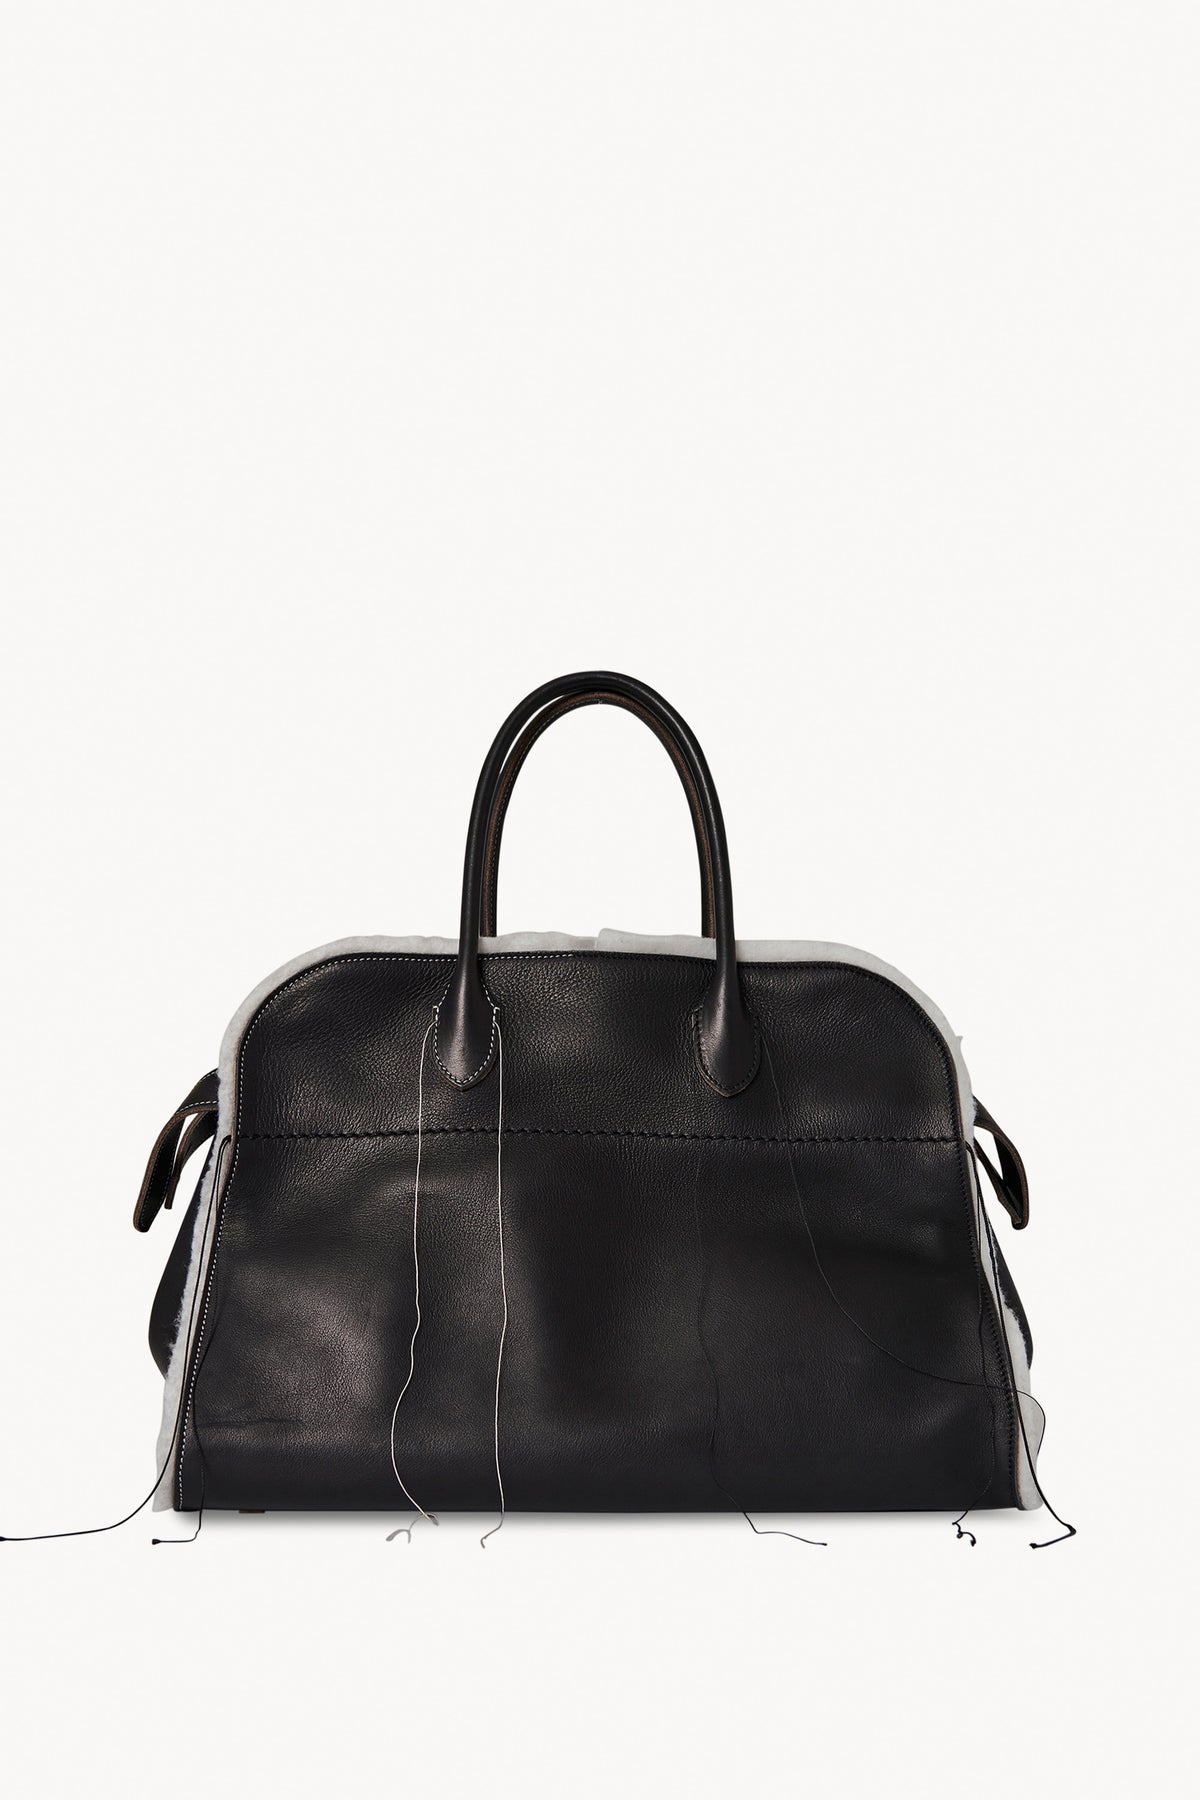 THE ROW MARGAUX15 ザ・ロウ マルゴー15 cuir - バッグ